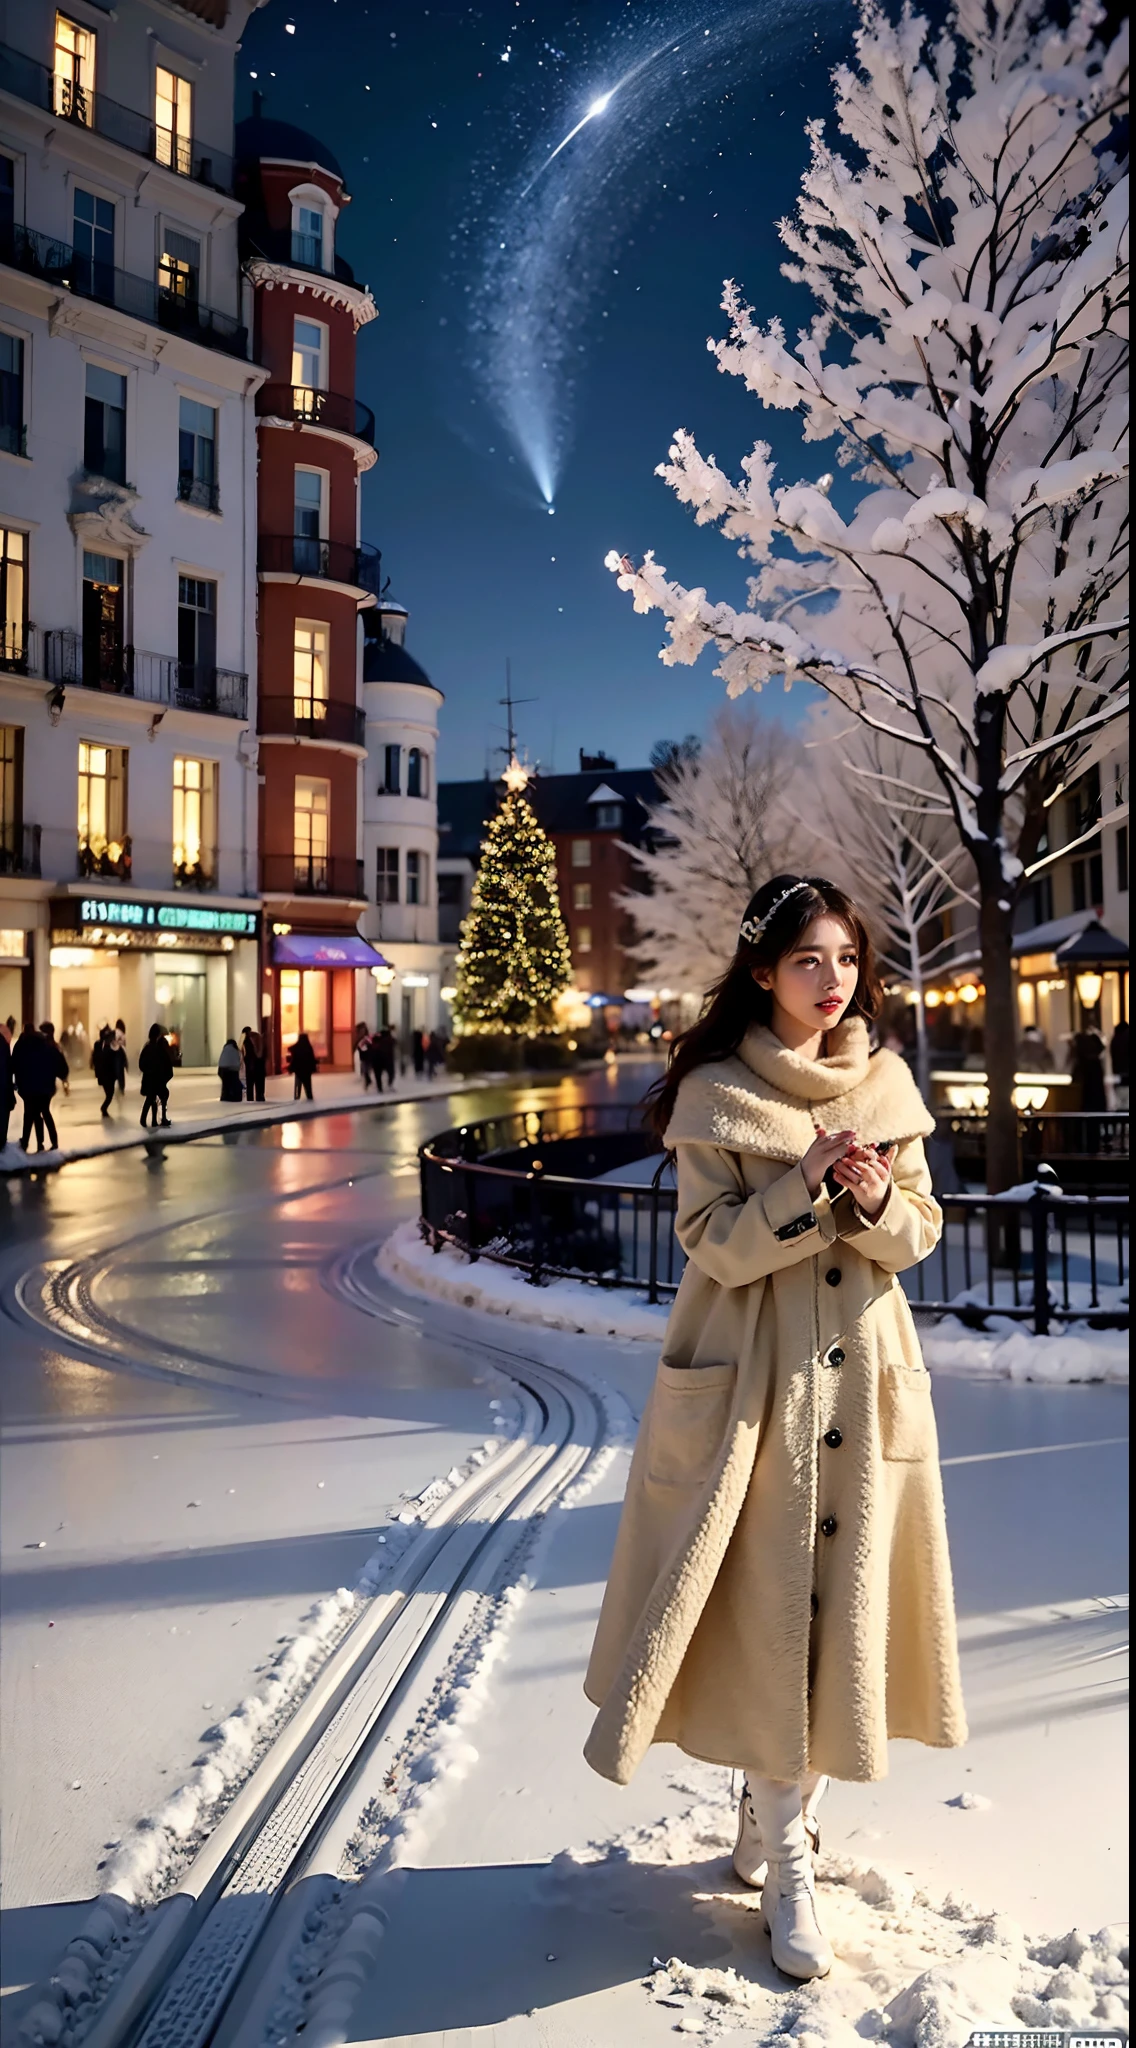 Realistic full body portrait of a woman in the center, Festive Christmas themed sea art set in the background. night cityscape, Shining with Christmas illuminations. gentle snow-covered scenery, Create a calm and fantastic atmosphere. The woman, Standing in the center, Wear warm winter clothes, be satisfied with beautiful things、looks peaceful, The sparkle of the city reflected in her eyes. Atmosphere reminiscent of a Christmas night by the sea, With the city lights shining on the water surface, add enchantment.